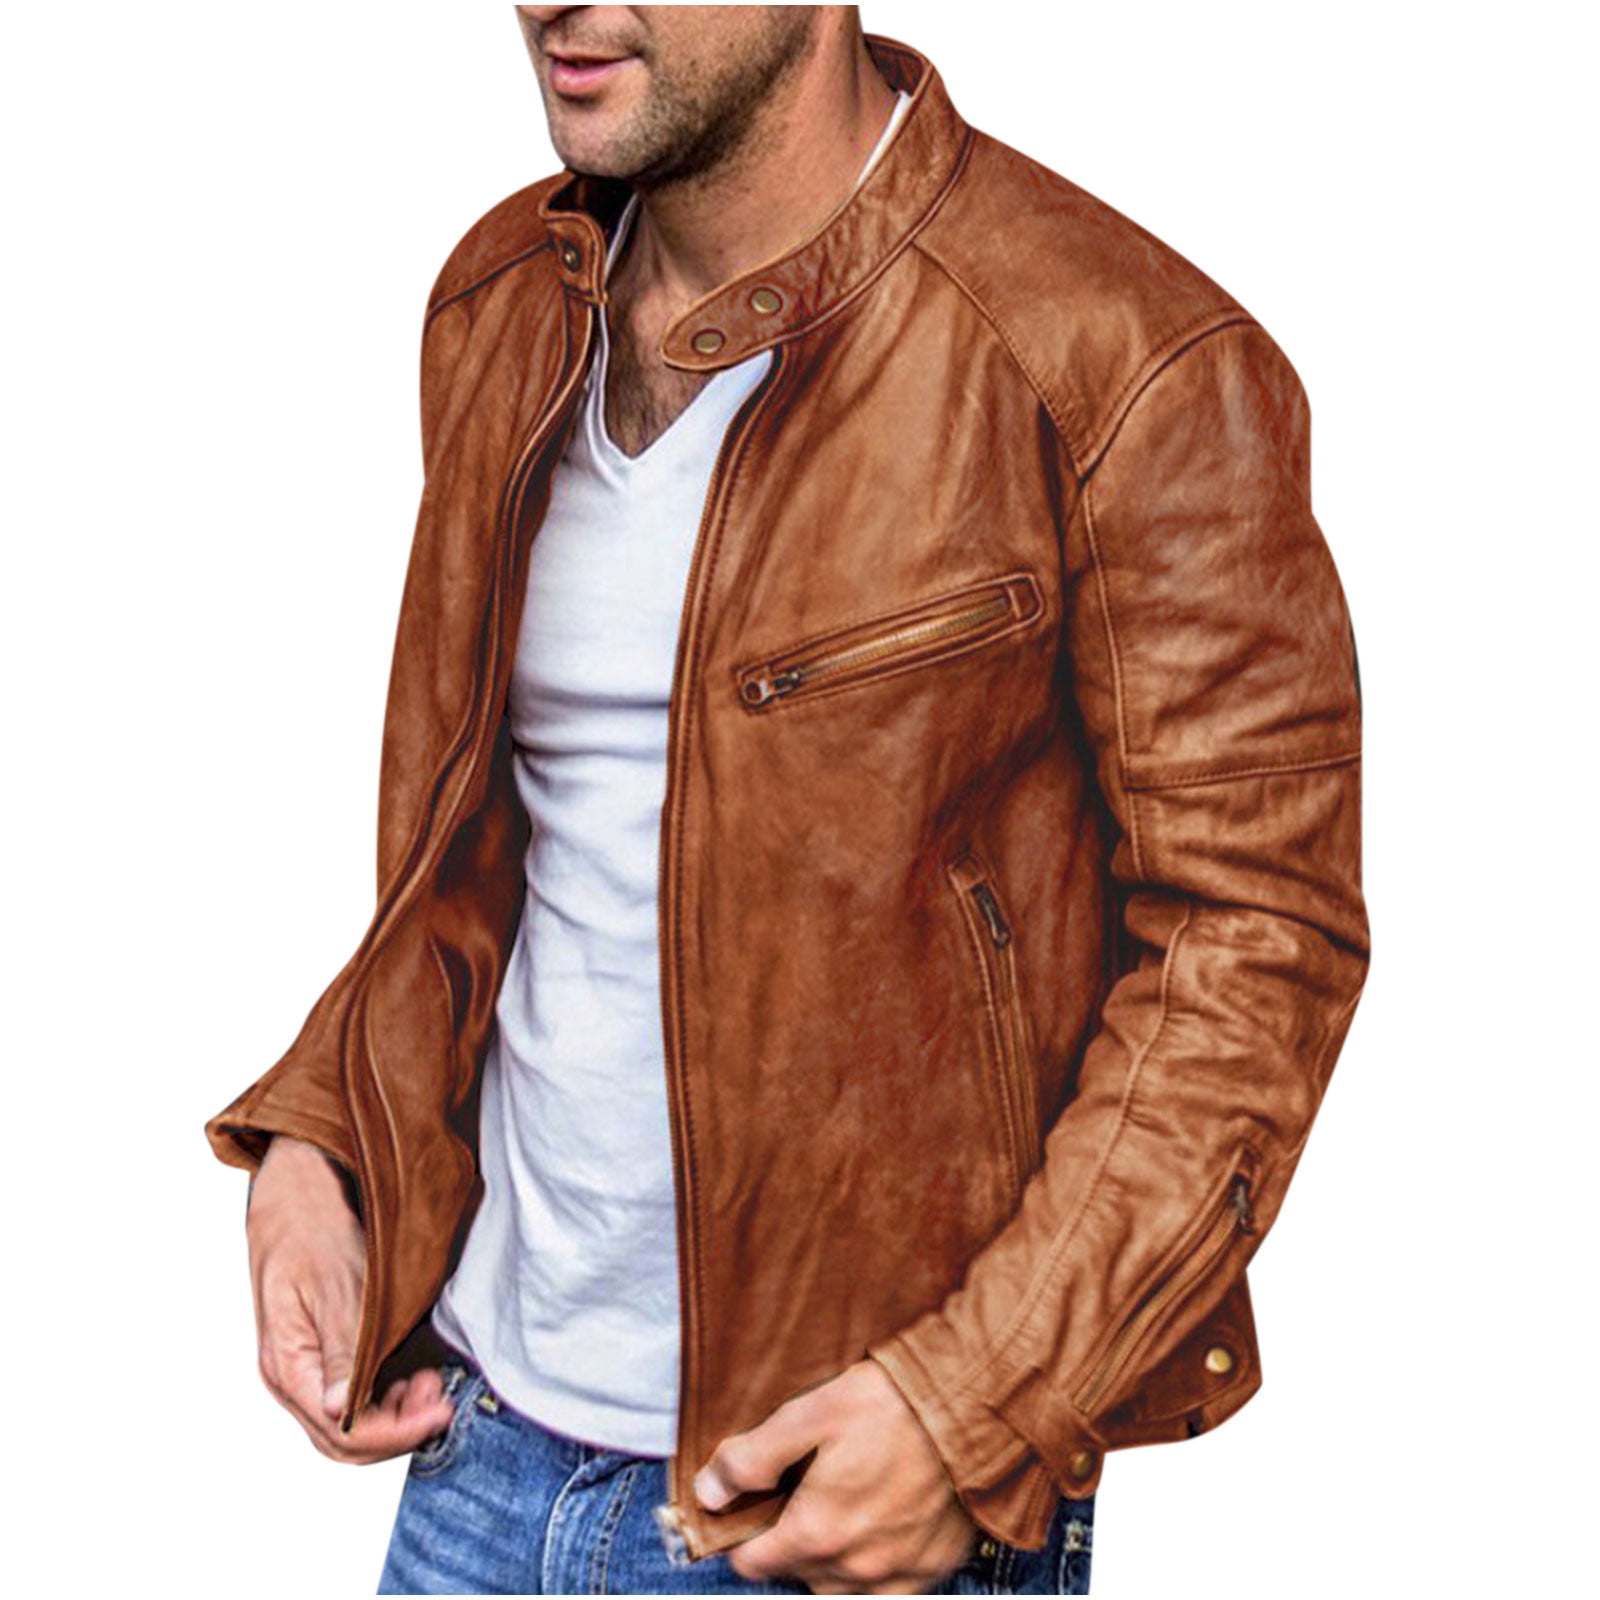 Landscap Mens Stand Collar PU Leather Jacket Faux Leather Coats Slim Fit Motorcycle Jacket 